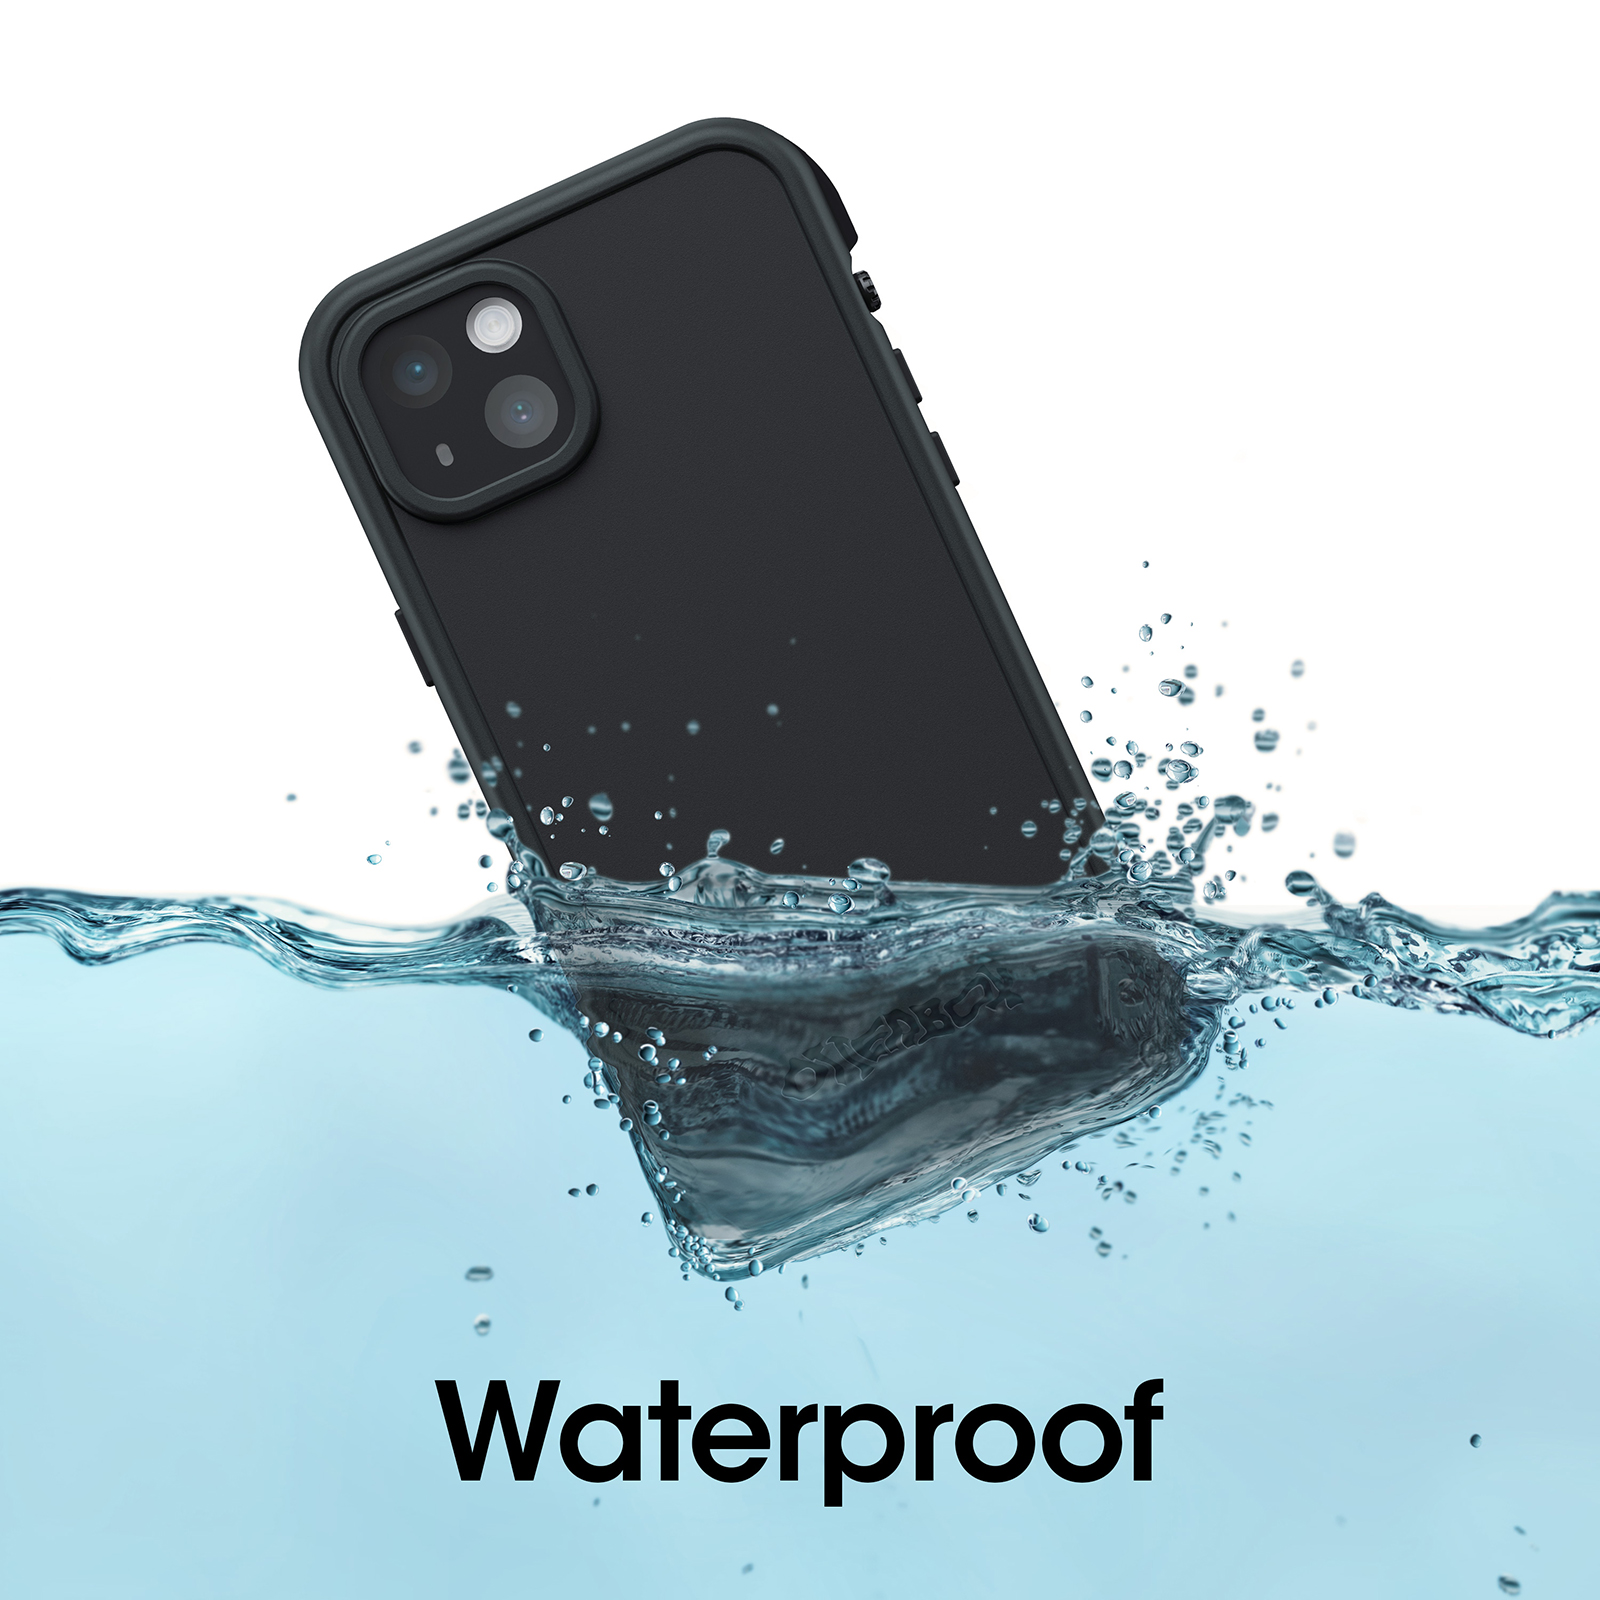 https://www.otterbox.com/on/demandware.static/-/Sites-masterCatalog/en/dw499bbc98/productimages/dis/cases-screen-protection/fre-iphb22/fre-iphb22-black-3.jpg